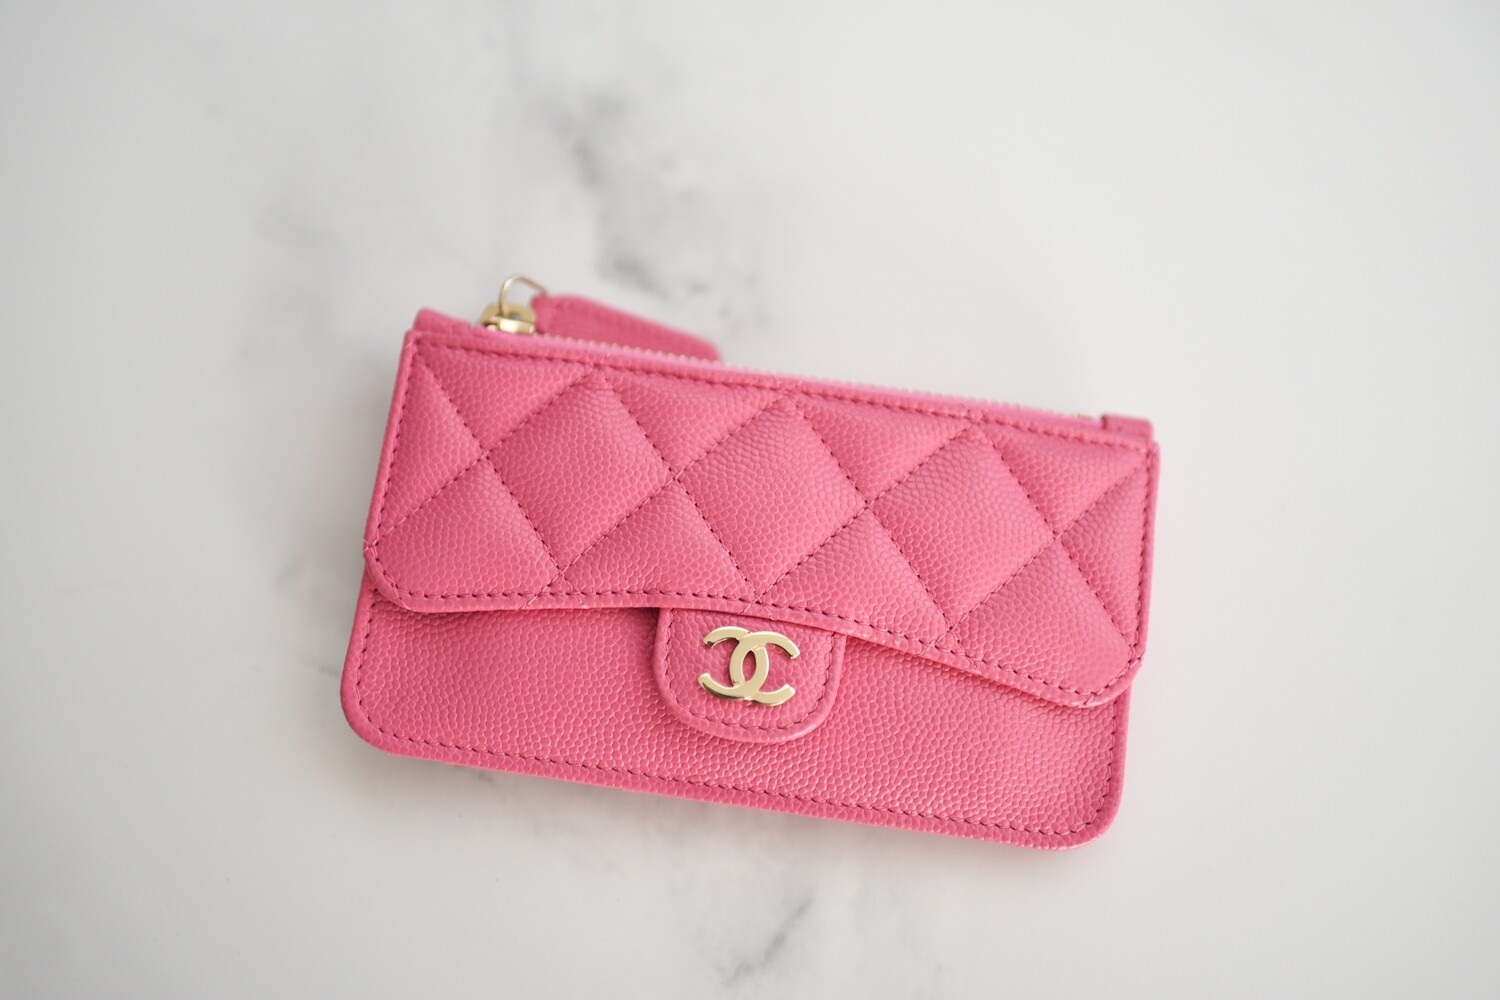 Chanel SLG Card Holder Wallet, Hot Pink Caviar Leather with Gold Hardware,  New in Box GA002